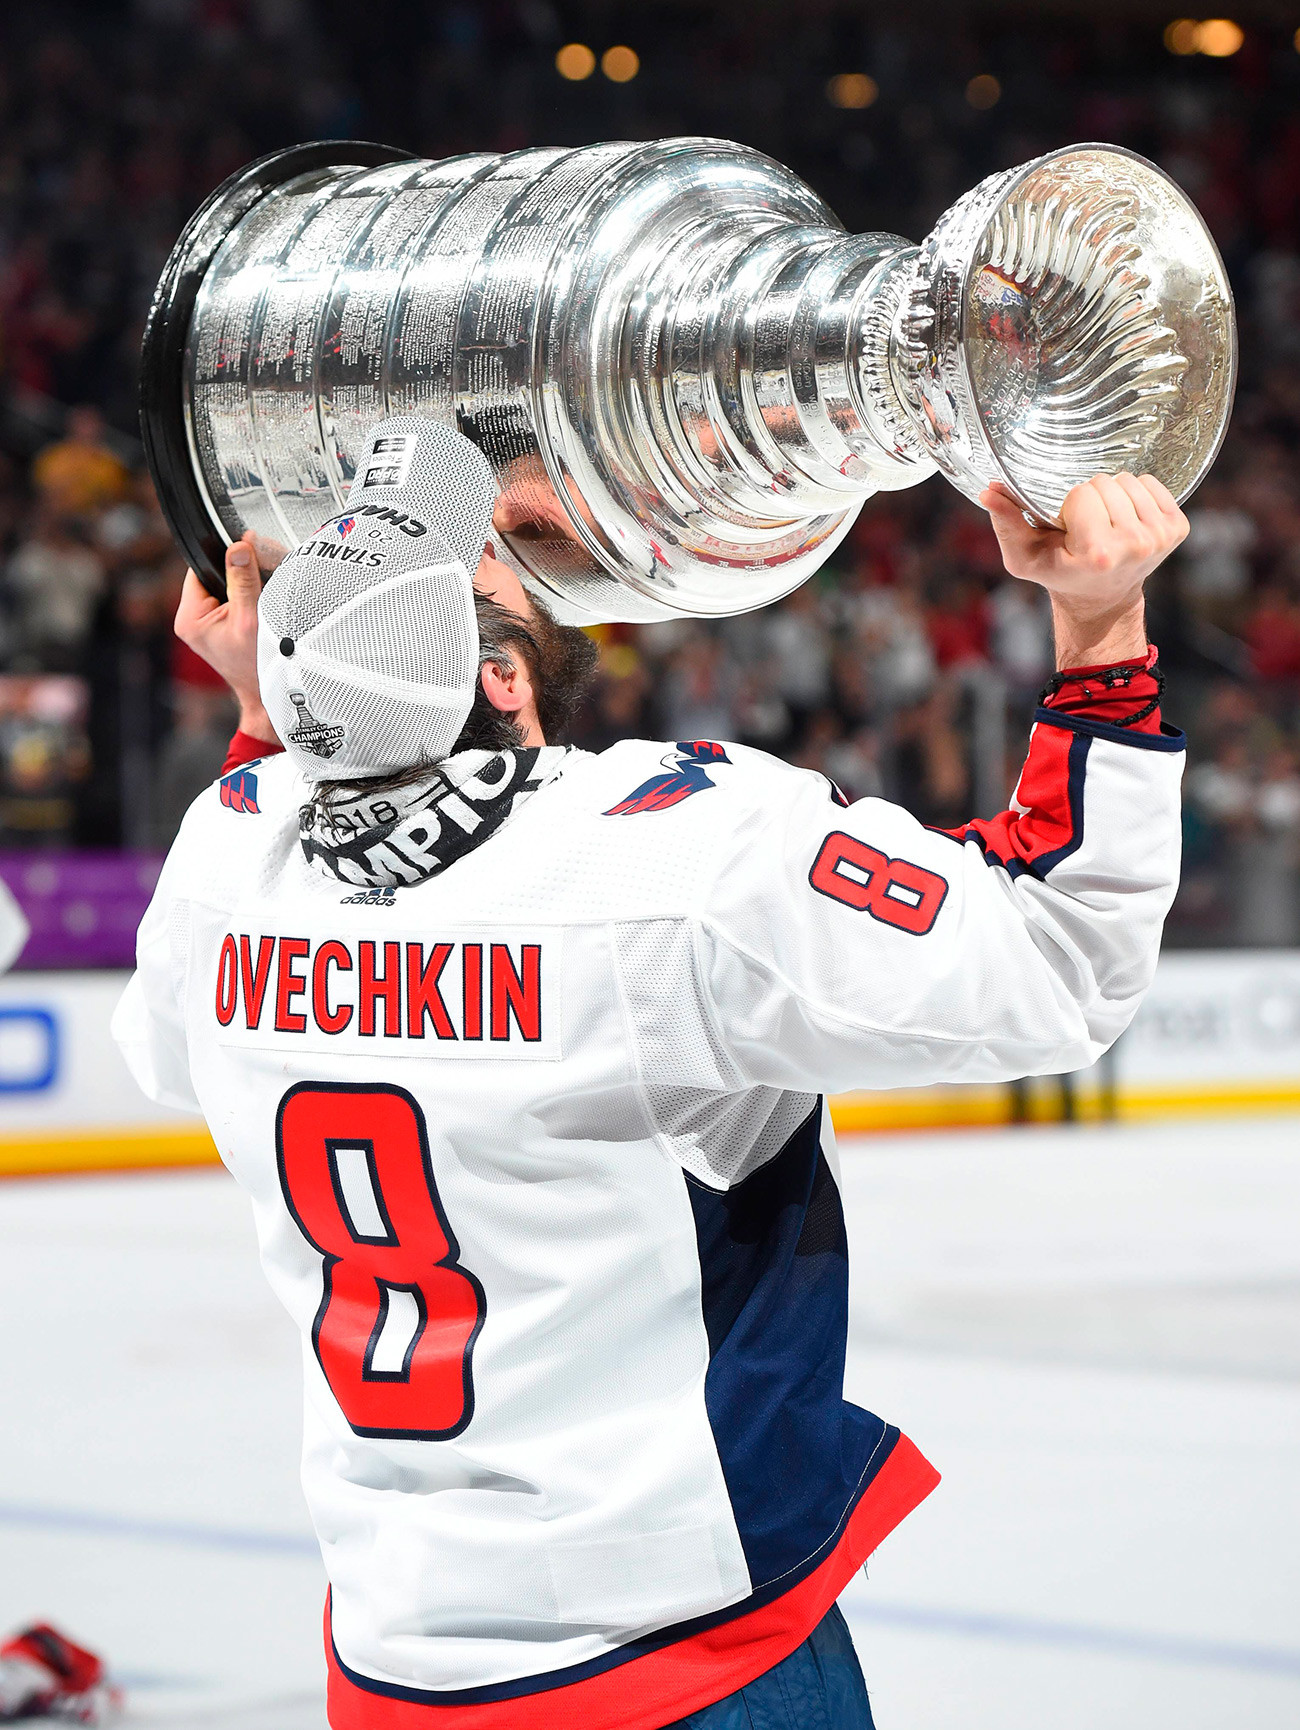 Washington Capitals Left Wing Alex Ovechkin (8) kisses the Stanley Cup to celebrate defeating the Las Vegas Golden Knights 4-3 during game 5 of the Stanley Cup Final between the Washington Capitals and the Las Vegas Golden Knights on June 07, 2018 at T-Mobile Arena in Las Vegas, NV.